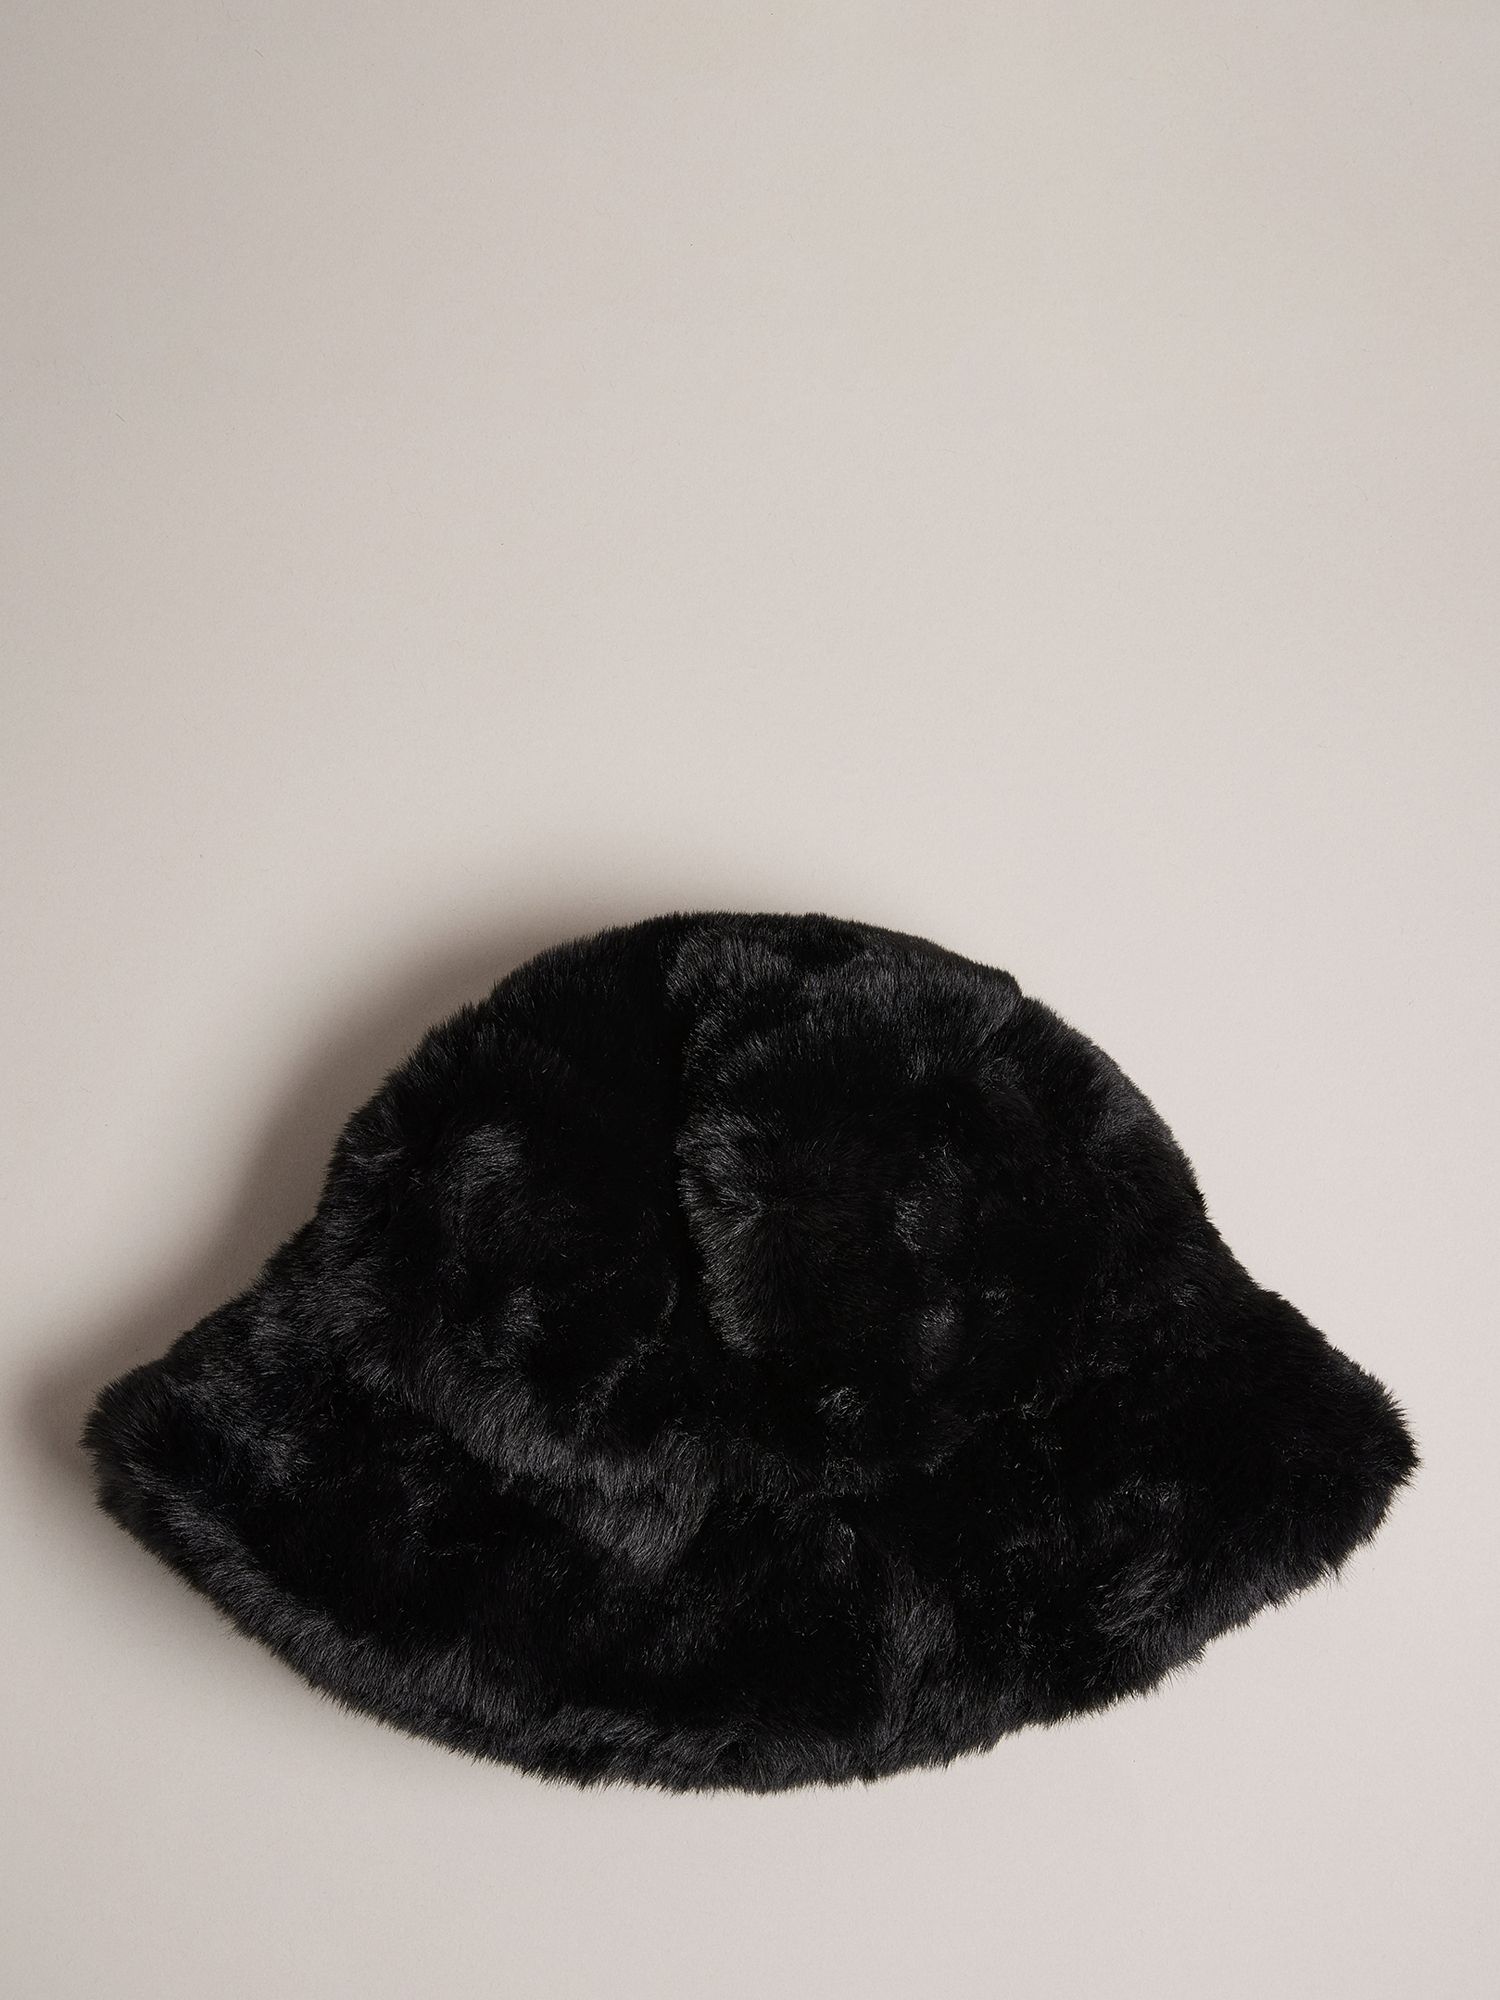 Ted Baker Prinnia Faux Fur Bucket Hat, Black, One Size